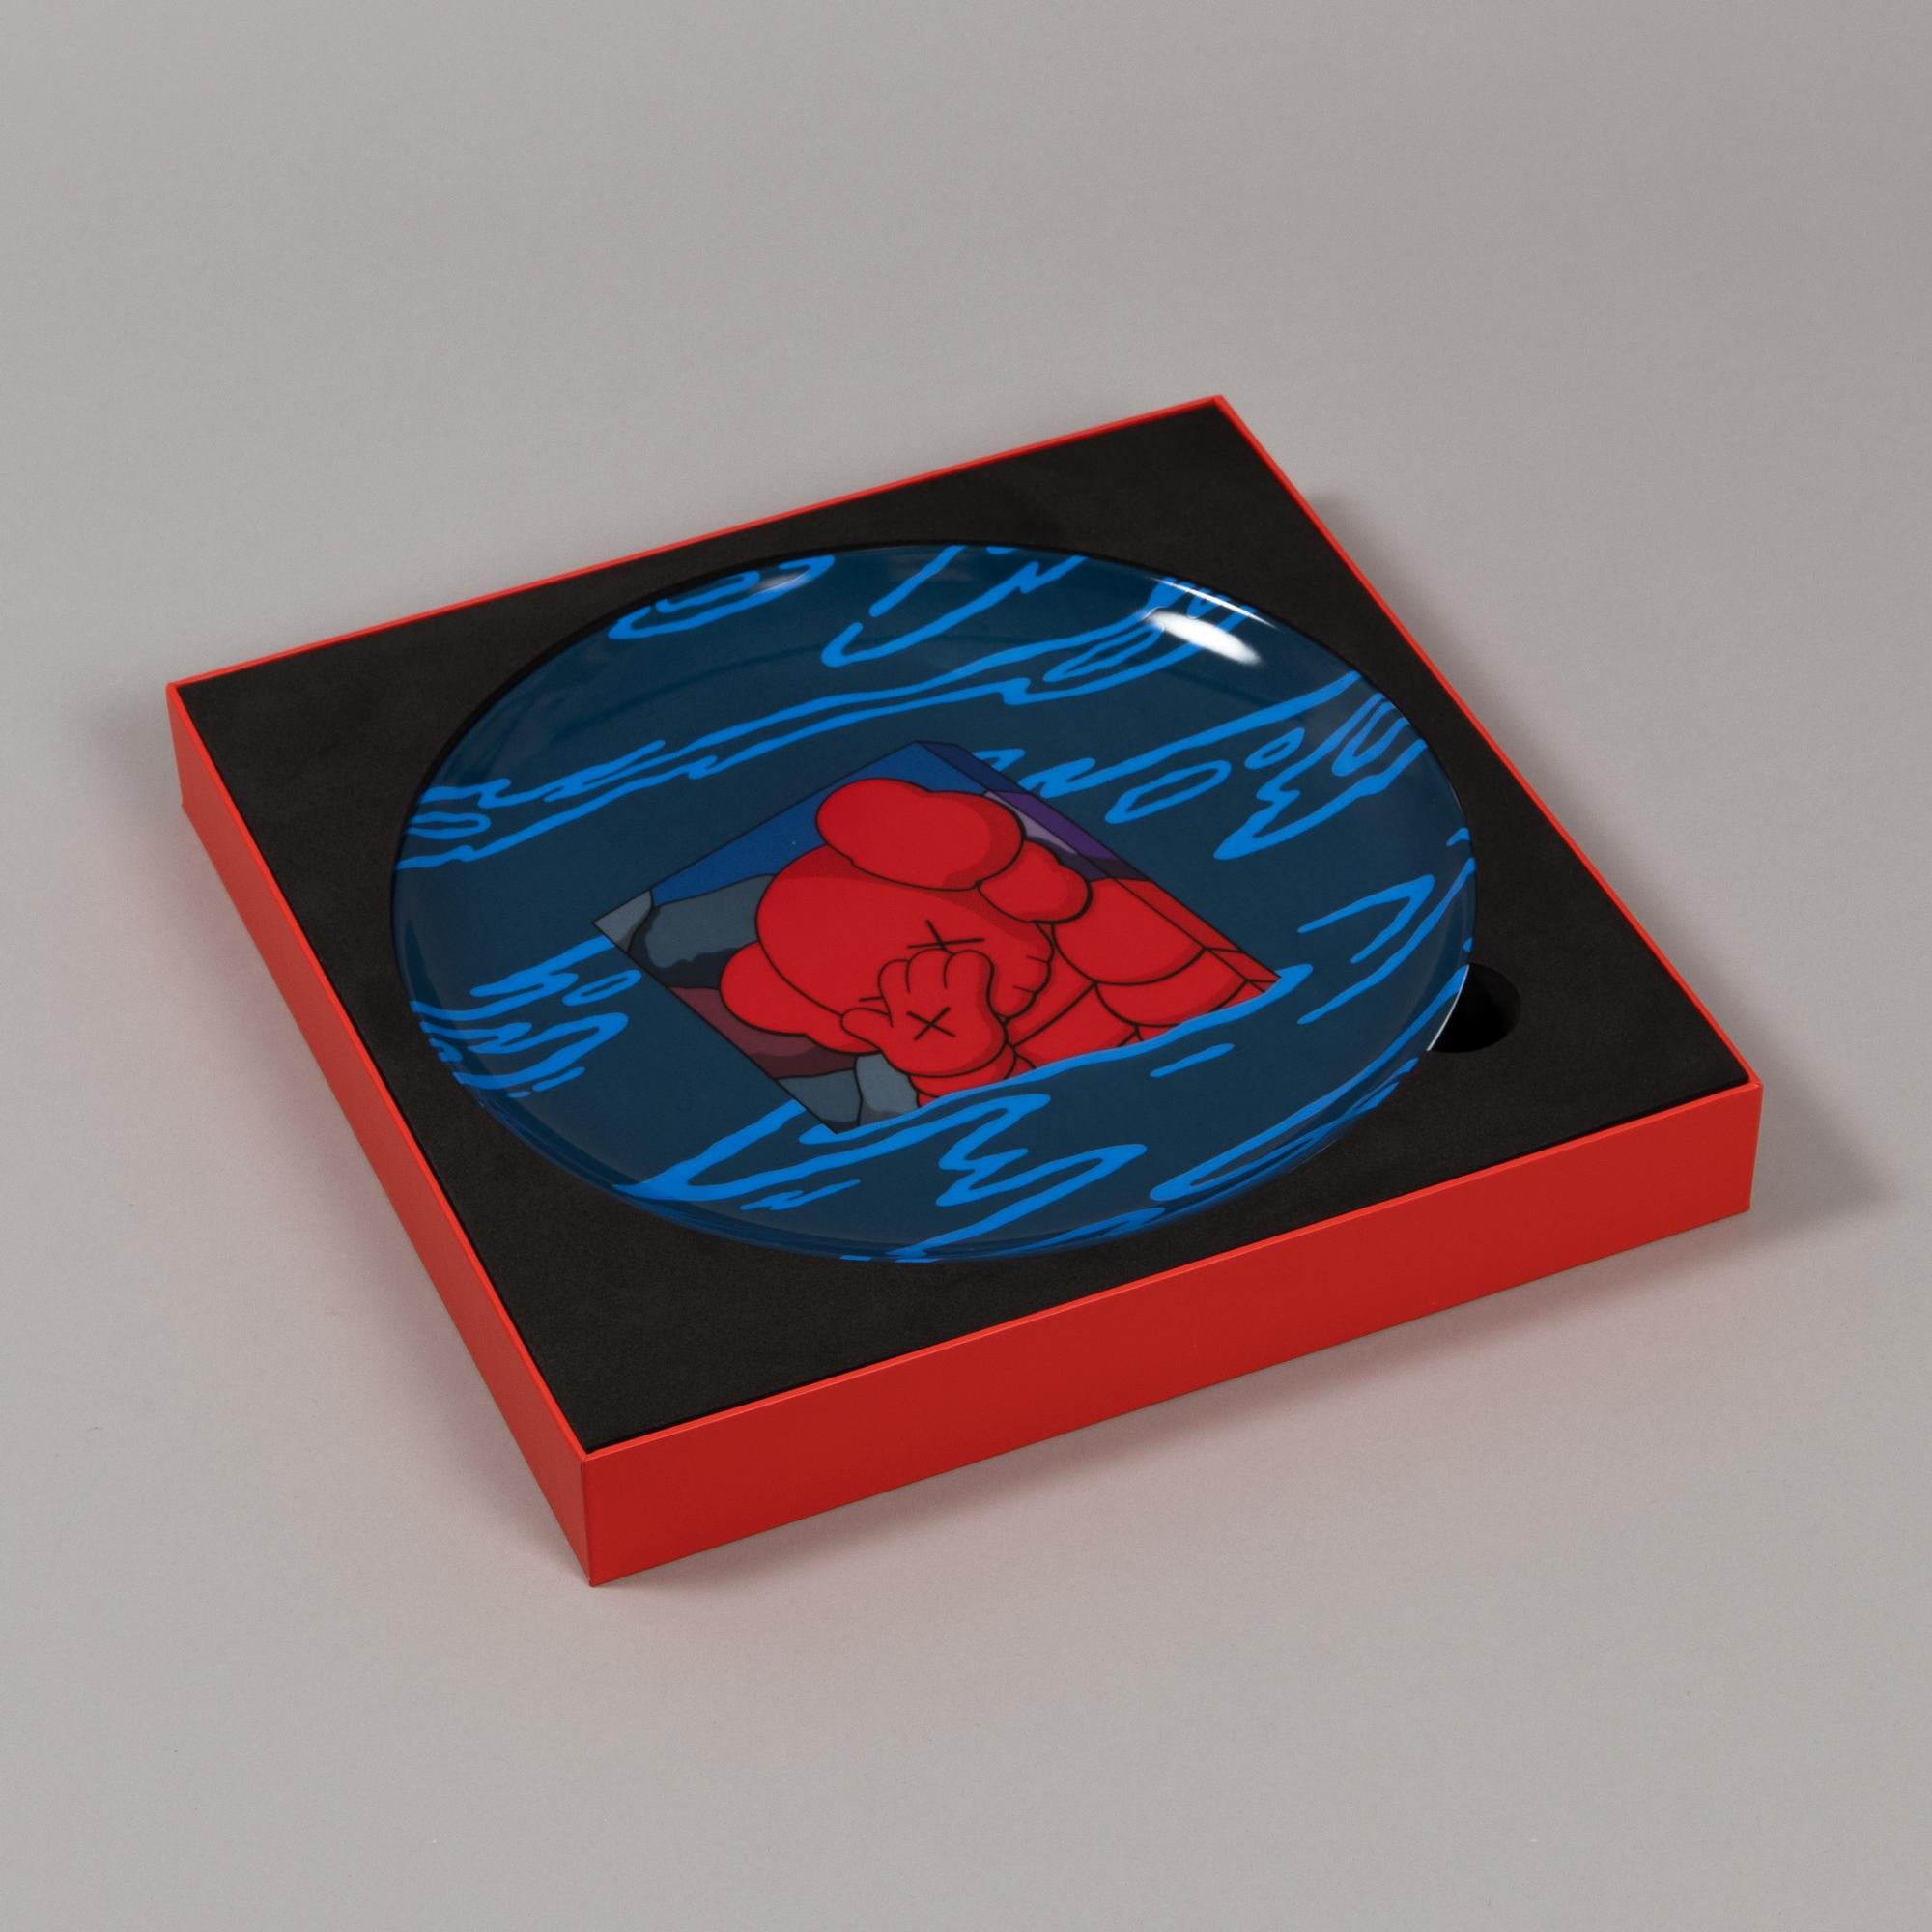 KAWS, Hours, Nights, Weeks, Months - Limited Edition Plate, Street Art 2